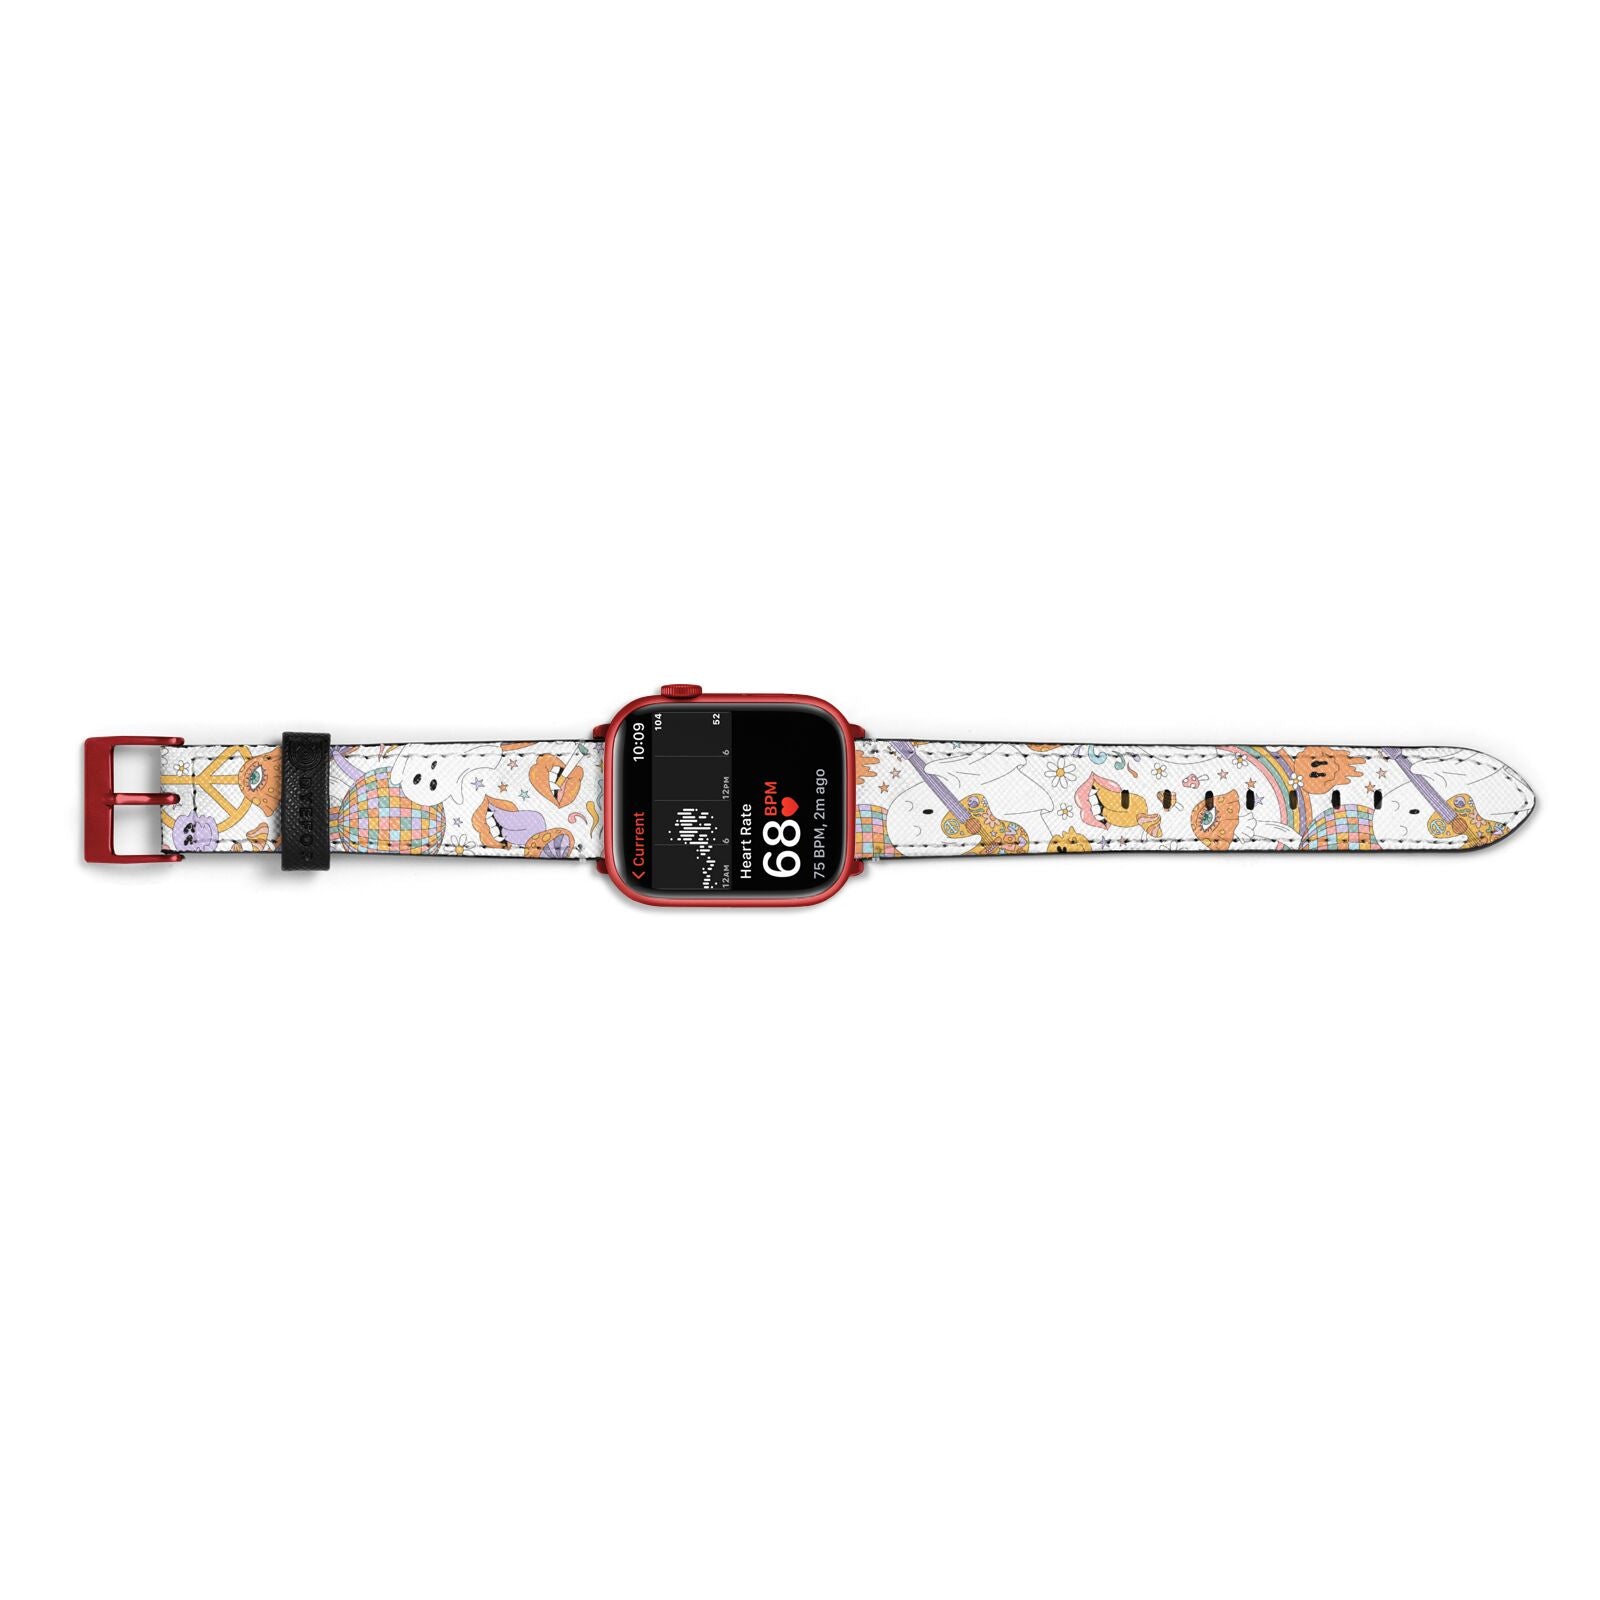 Disco Ghosts Apple Watch Strap Size 38mm Landscape Image Red Hardware